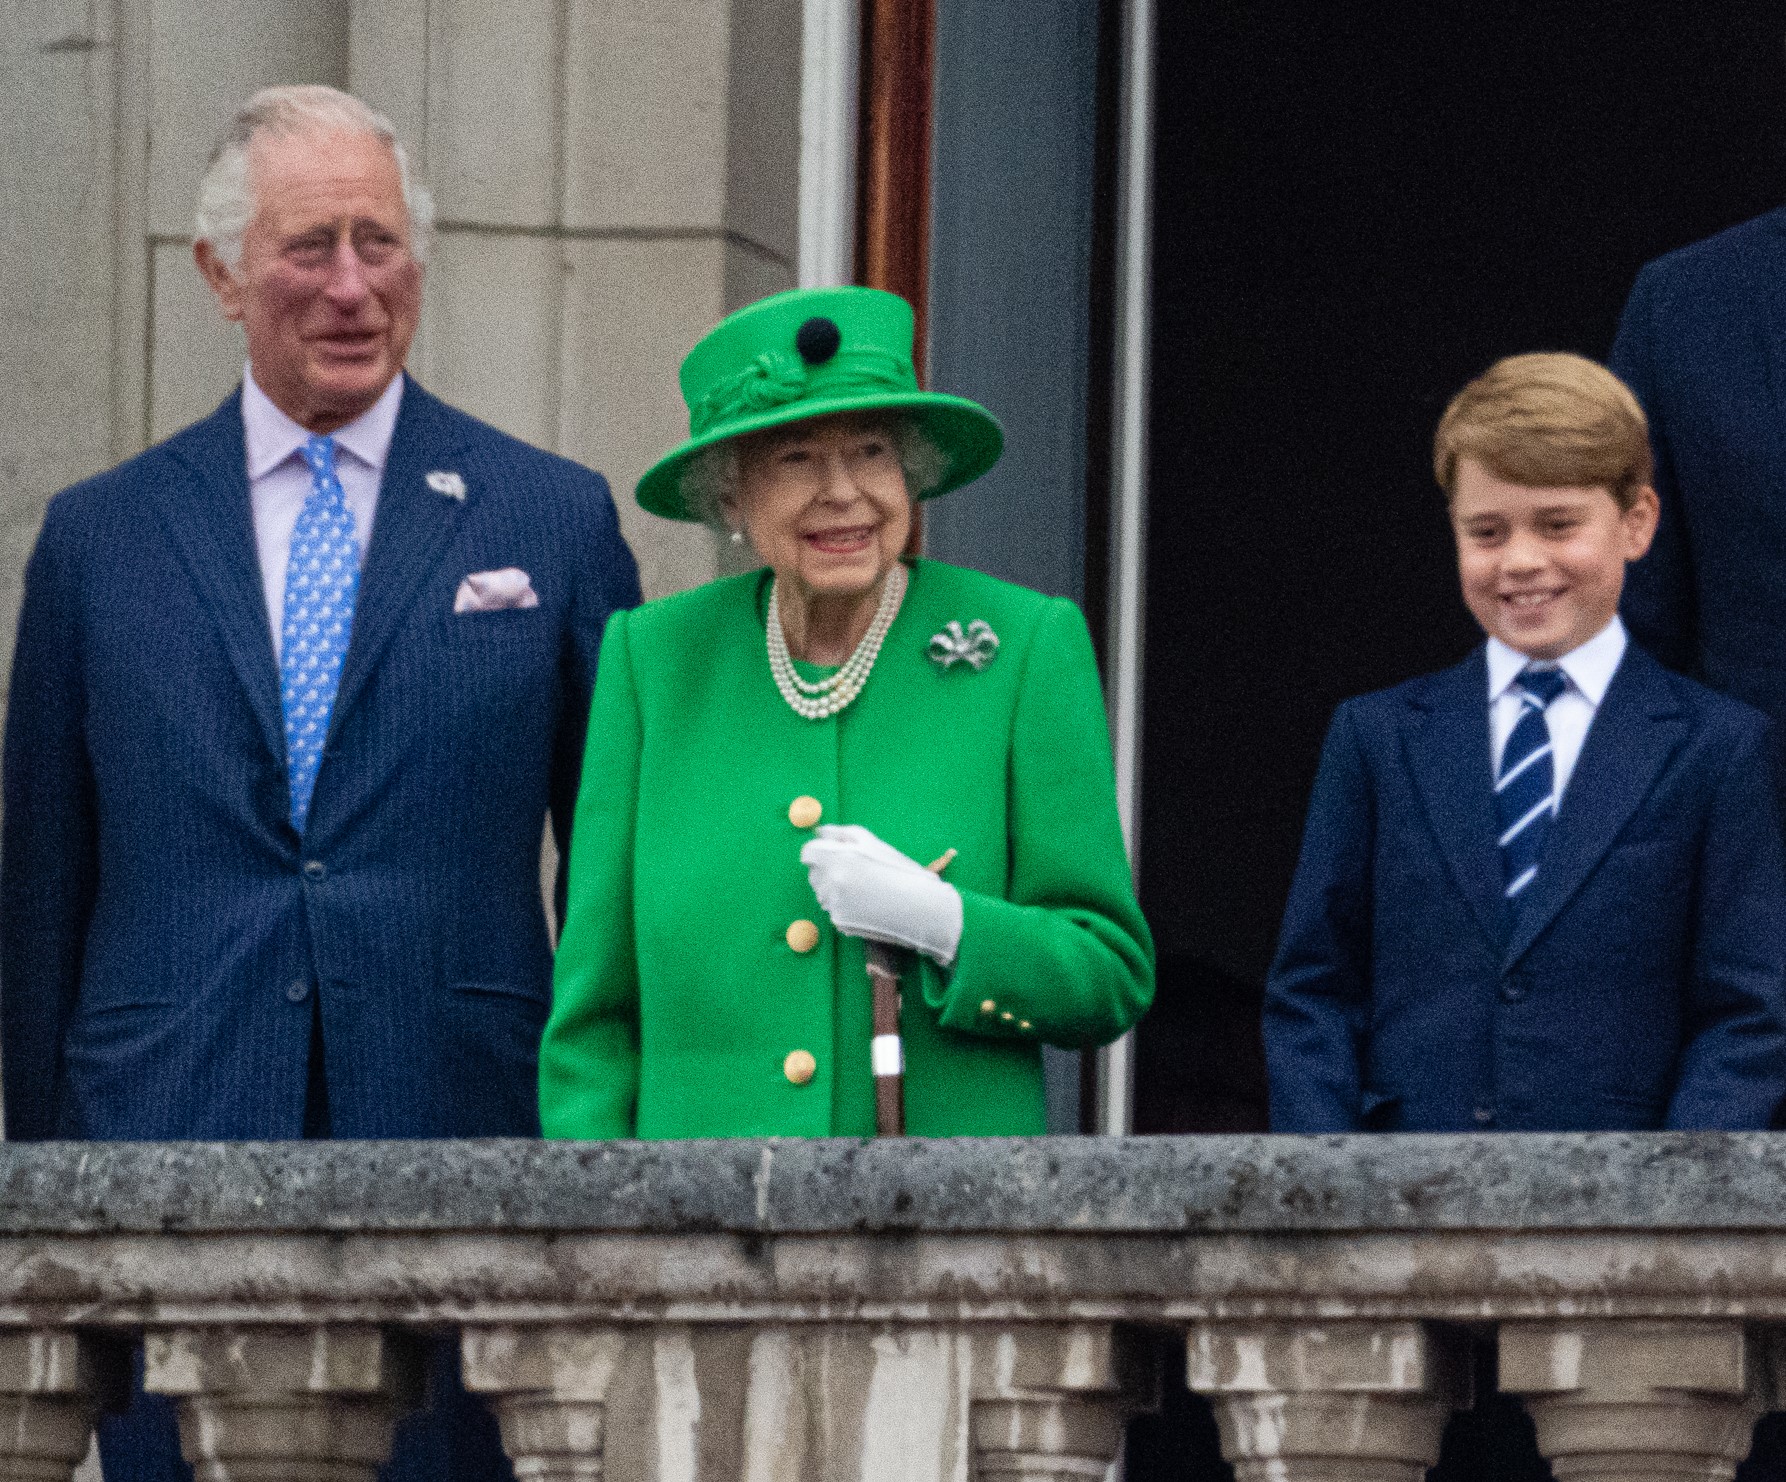 Queen Elizabeth II, then-Prince Charles, and Prince George on the balcony of Buckingham Palace during the Platinum Jubilee Pageant